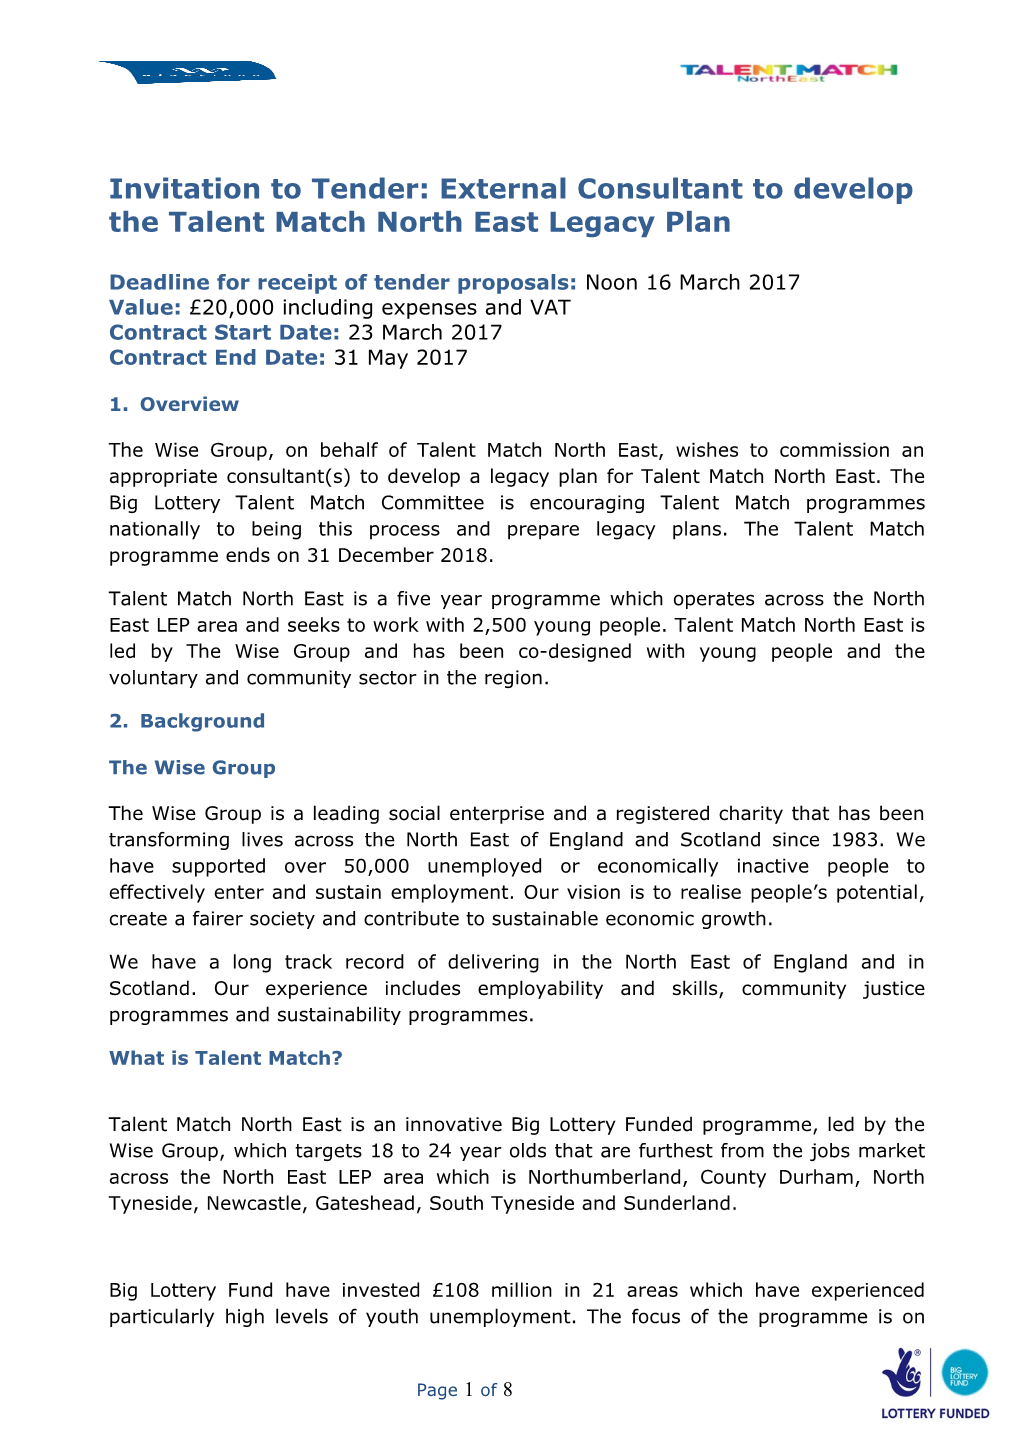 Invitation to Tender: External Consultant to Develop the Talent Match North East Legacy Plan